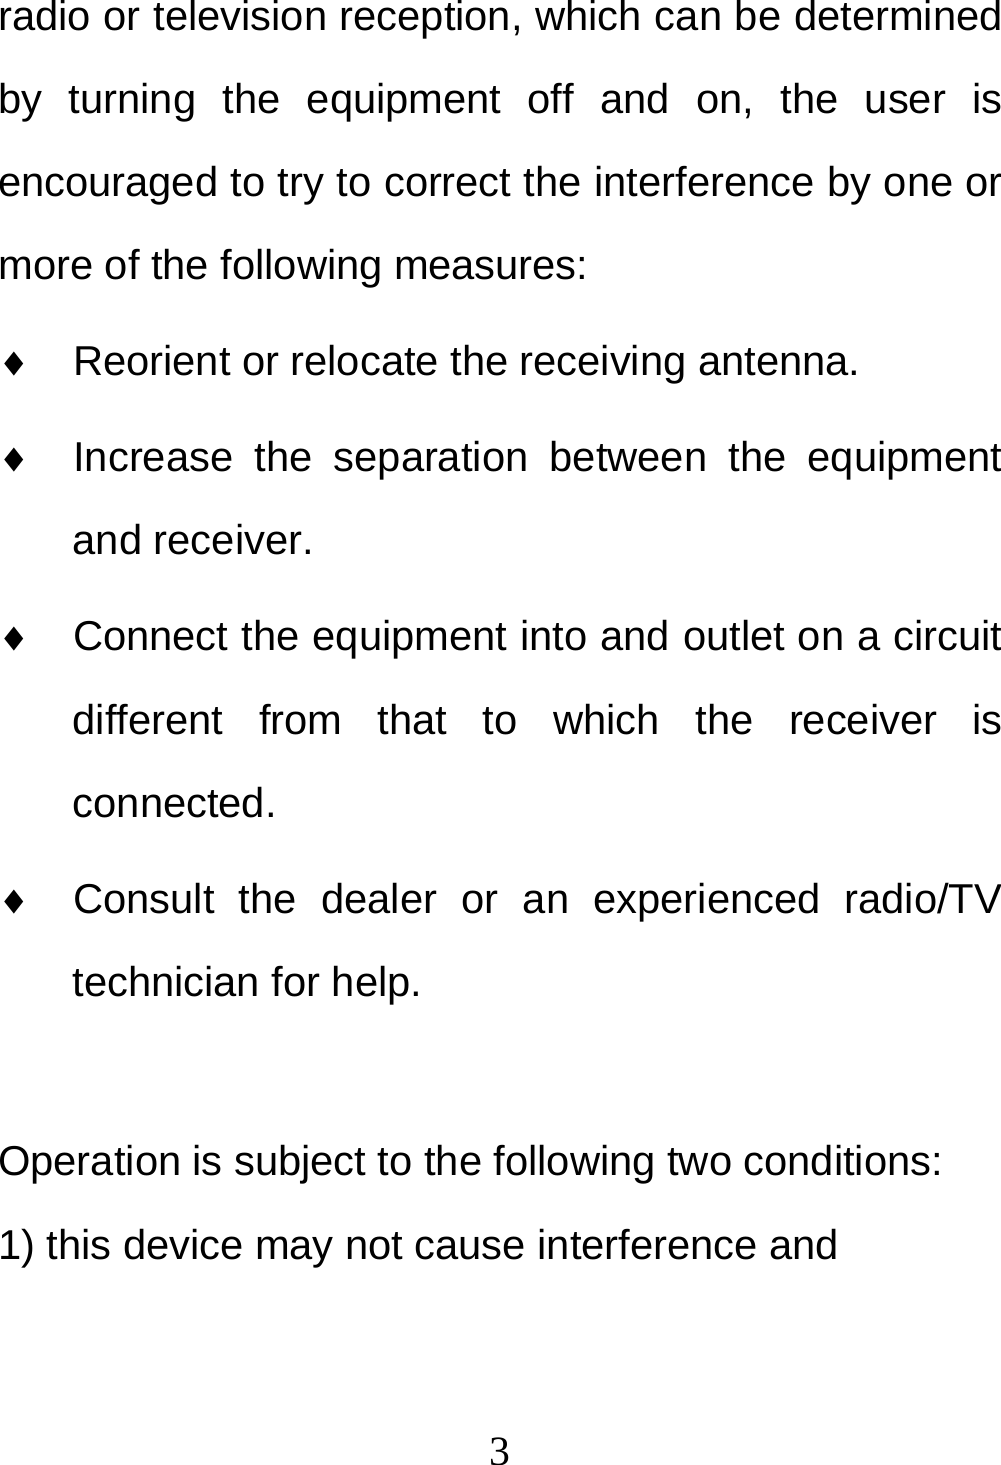  3radio or television reception, which can be determined by turning the equipment off and on, the user is encouraged to try to correct the interference by one or more of the following measures: ♦  Reorient or relocate the receiving antenna. ♦  Increase the separation between the equipment and receiver. ♦  Connect the equipment into and outlet on a circuit different from that to which the receiver is connected. ♦  Consult the dealer or an experienced radio/TV technician for help.  Operation is subject to the following two conditions: 1) this device may not cause interference and 